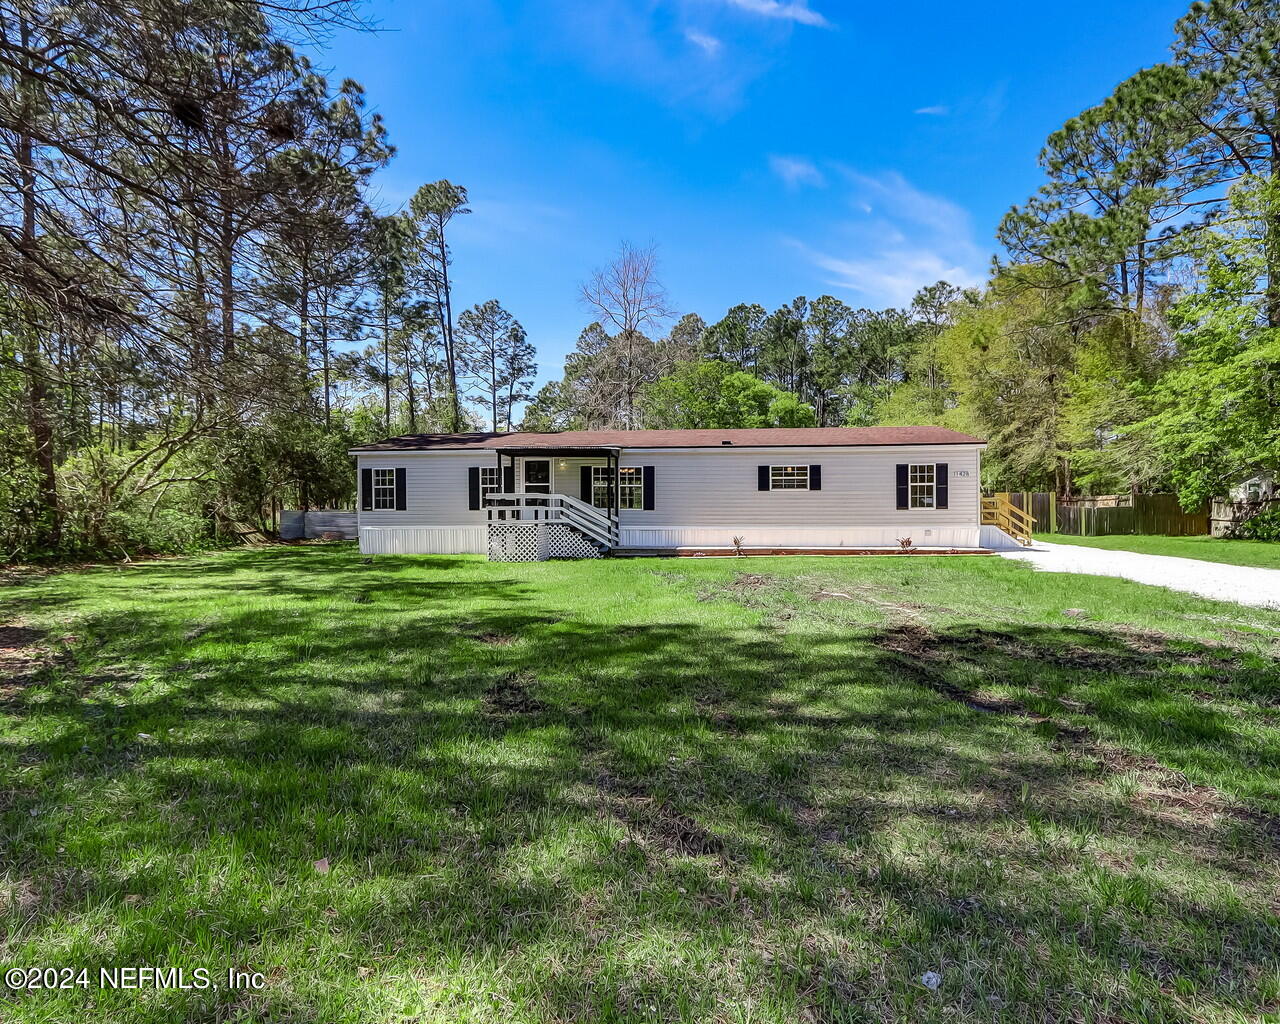 Middleburg, FL home for sale located at 1428 WOLF Trail, Middleburg, FL 32068